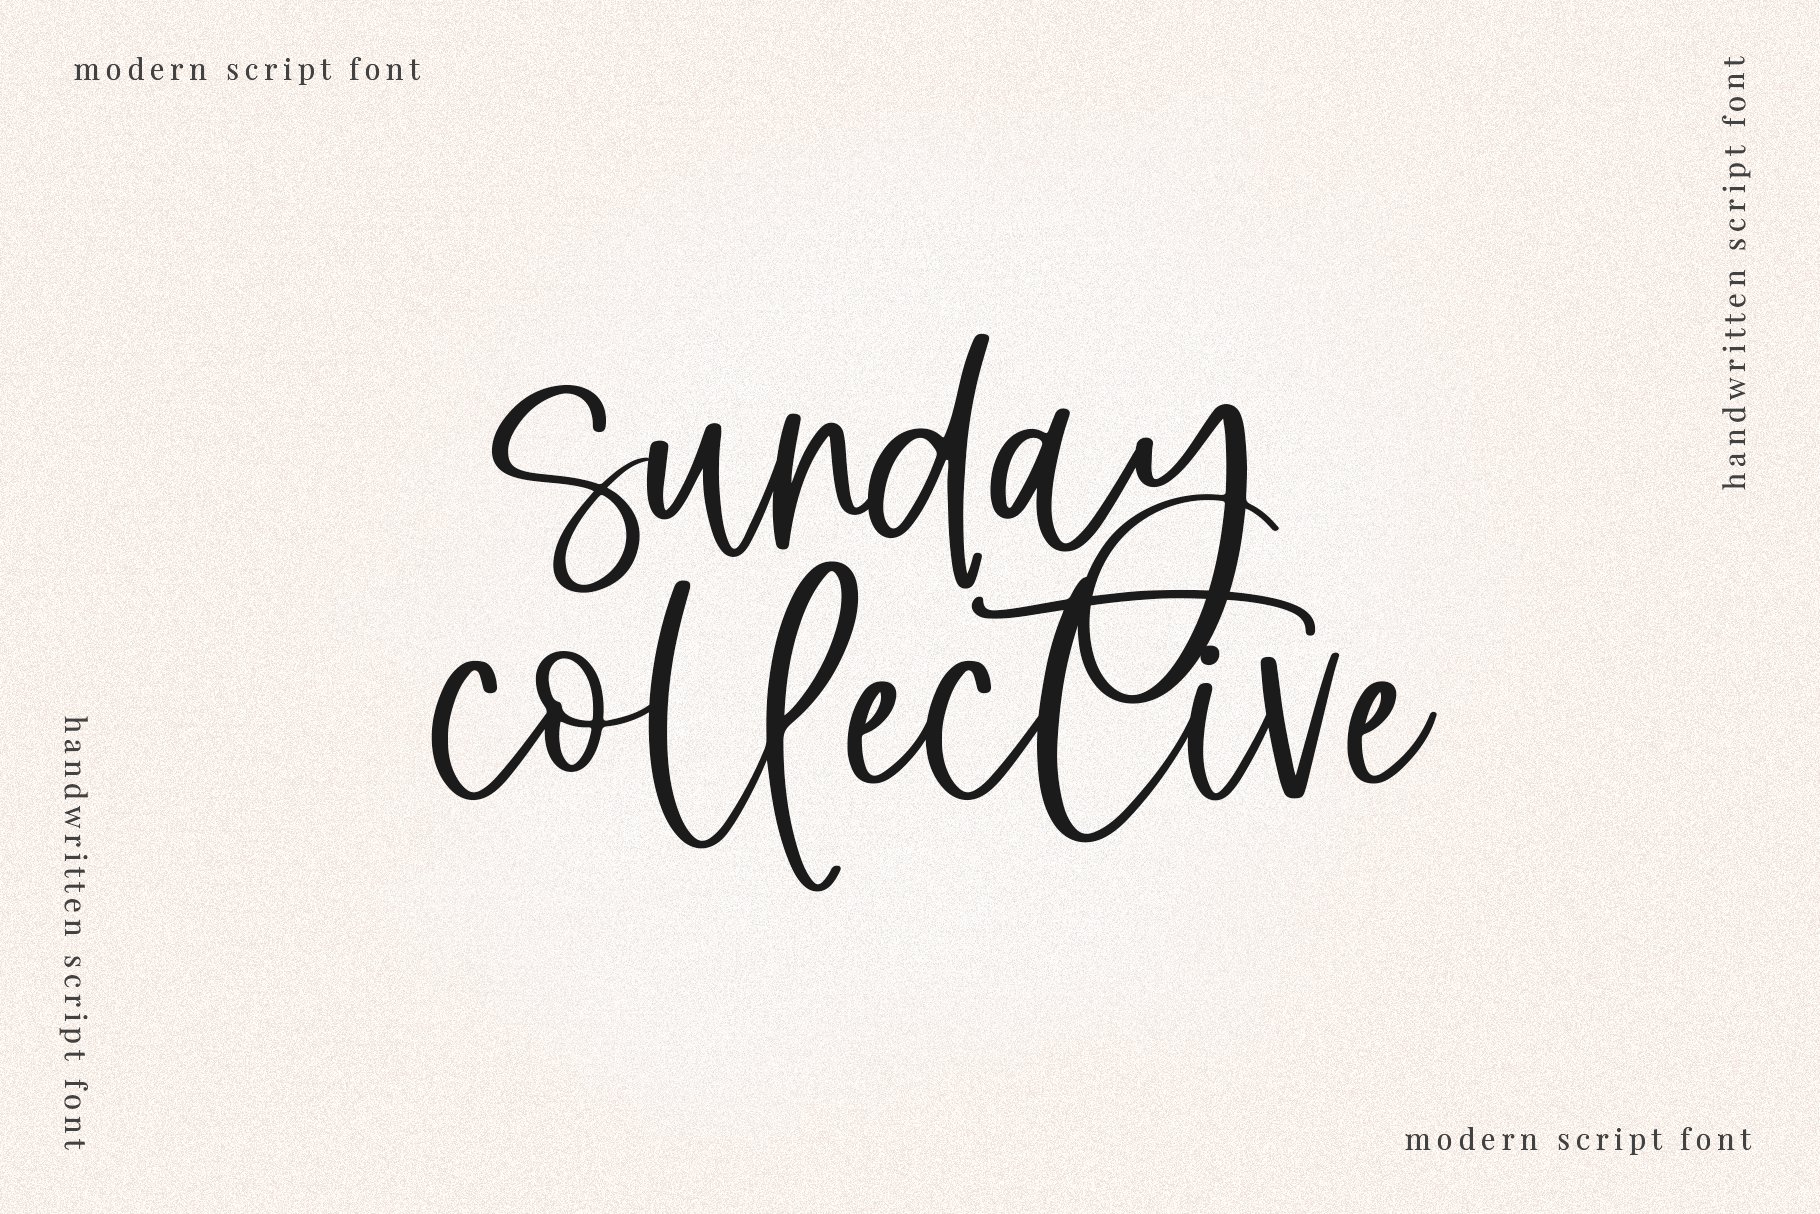 Sunday Collective | Script Font cover image.